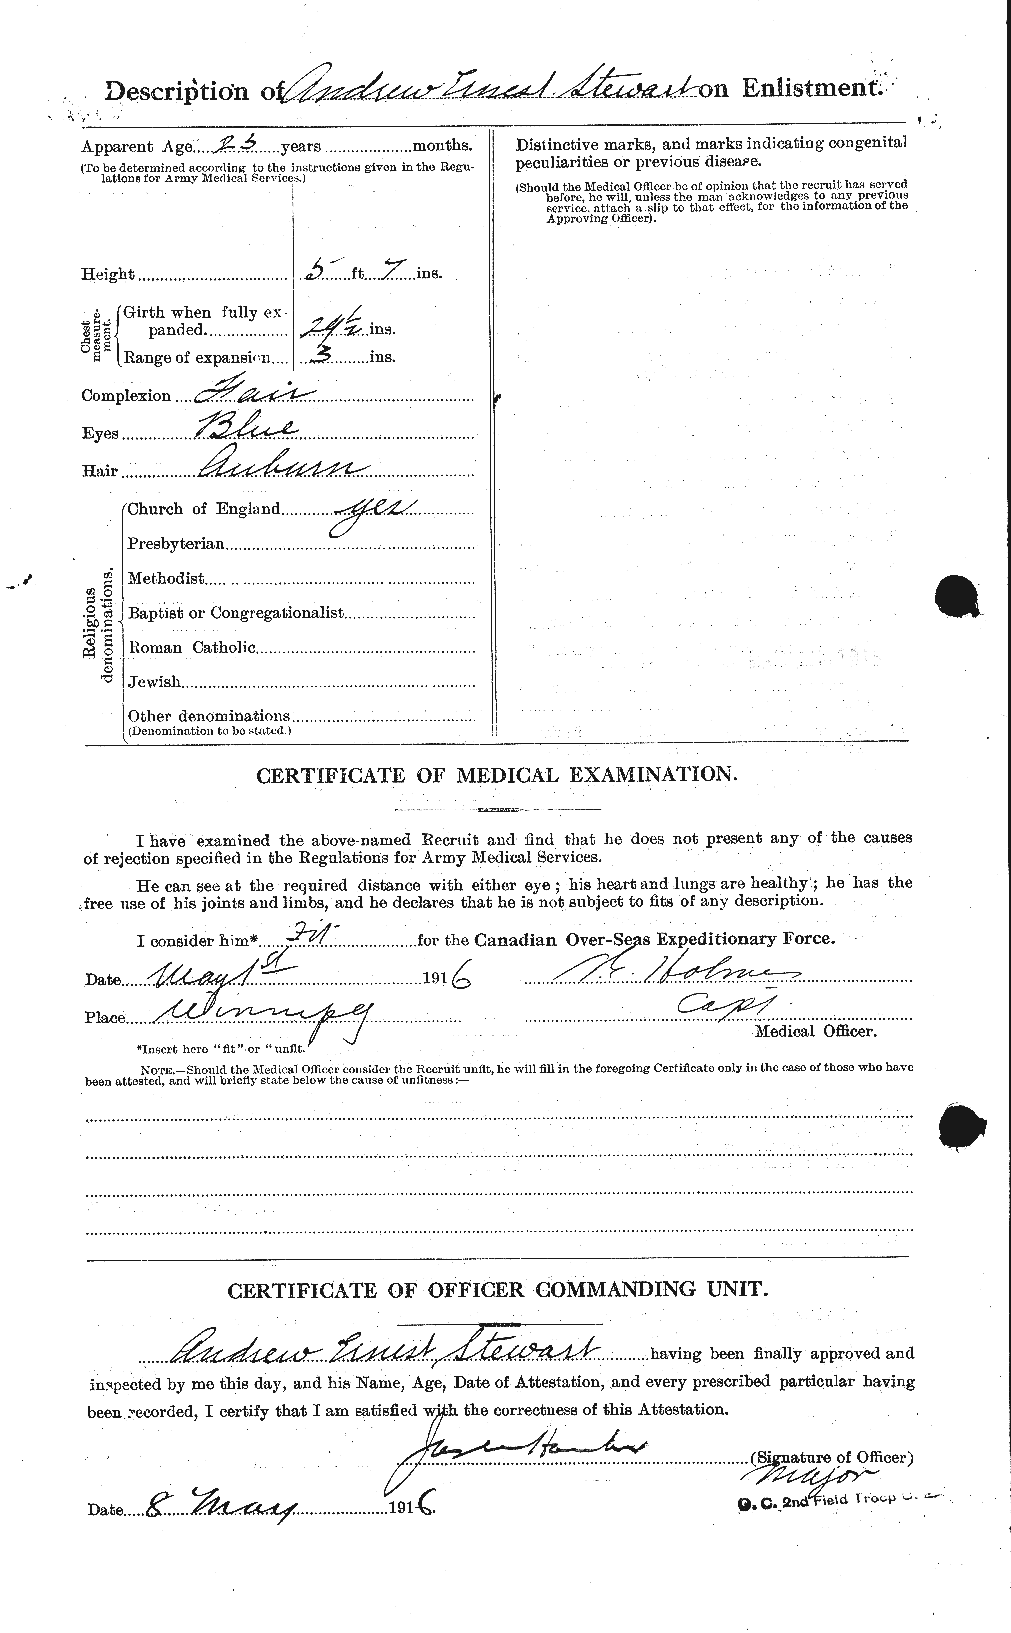 Personnel Records of the First World War - CEF 118519b